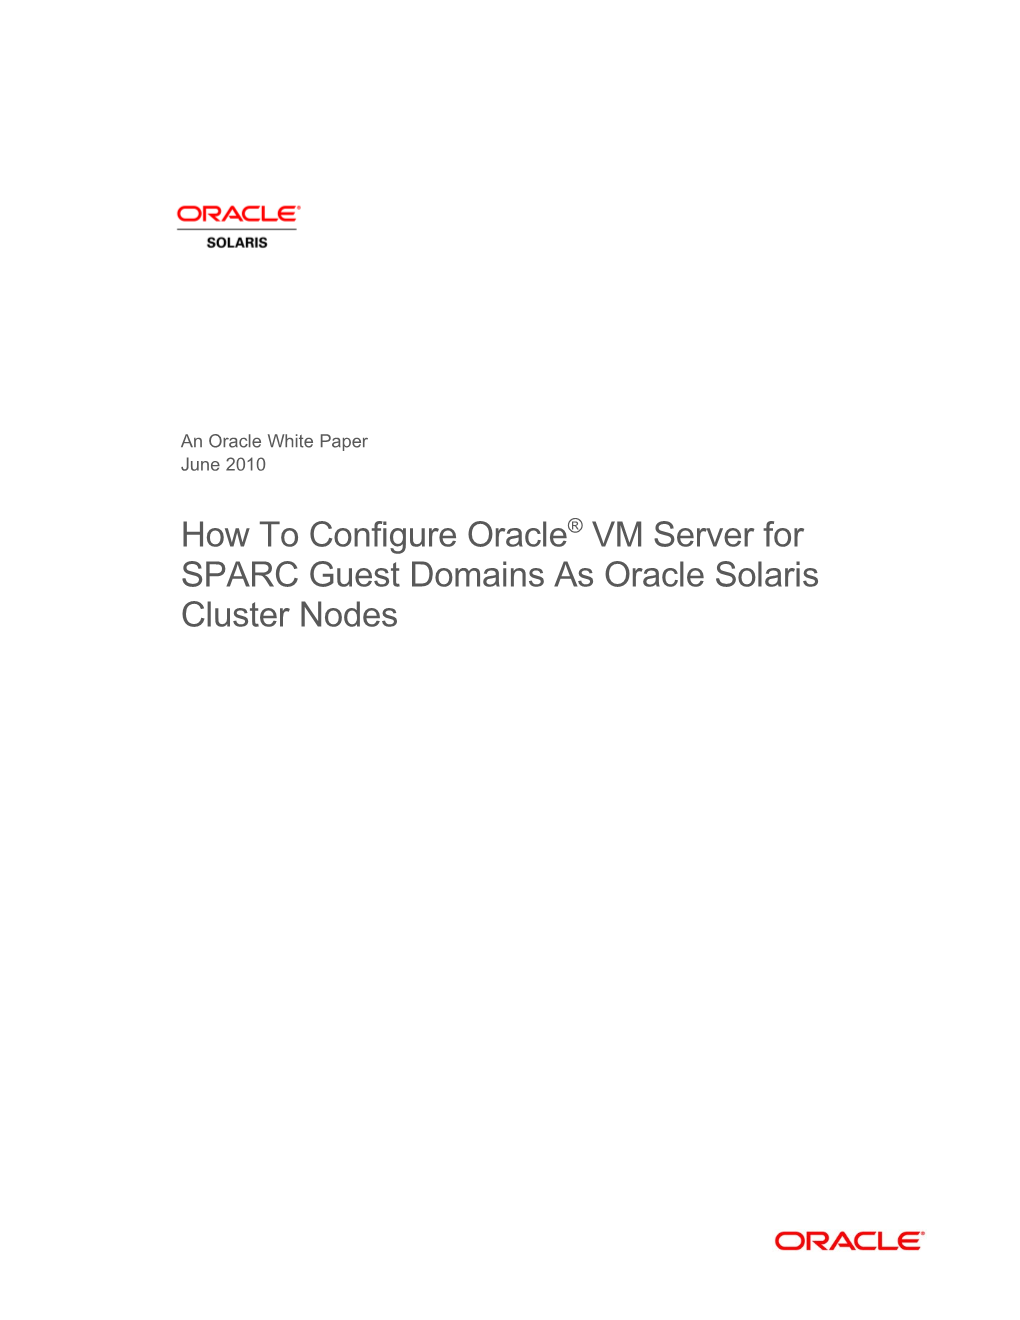 How to Create an Oracle Solaris Service Management Facility Manifest